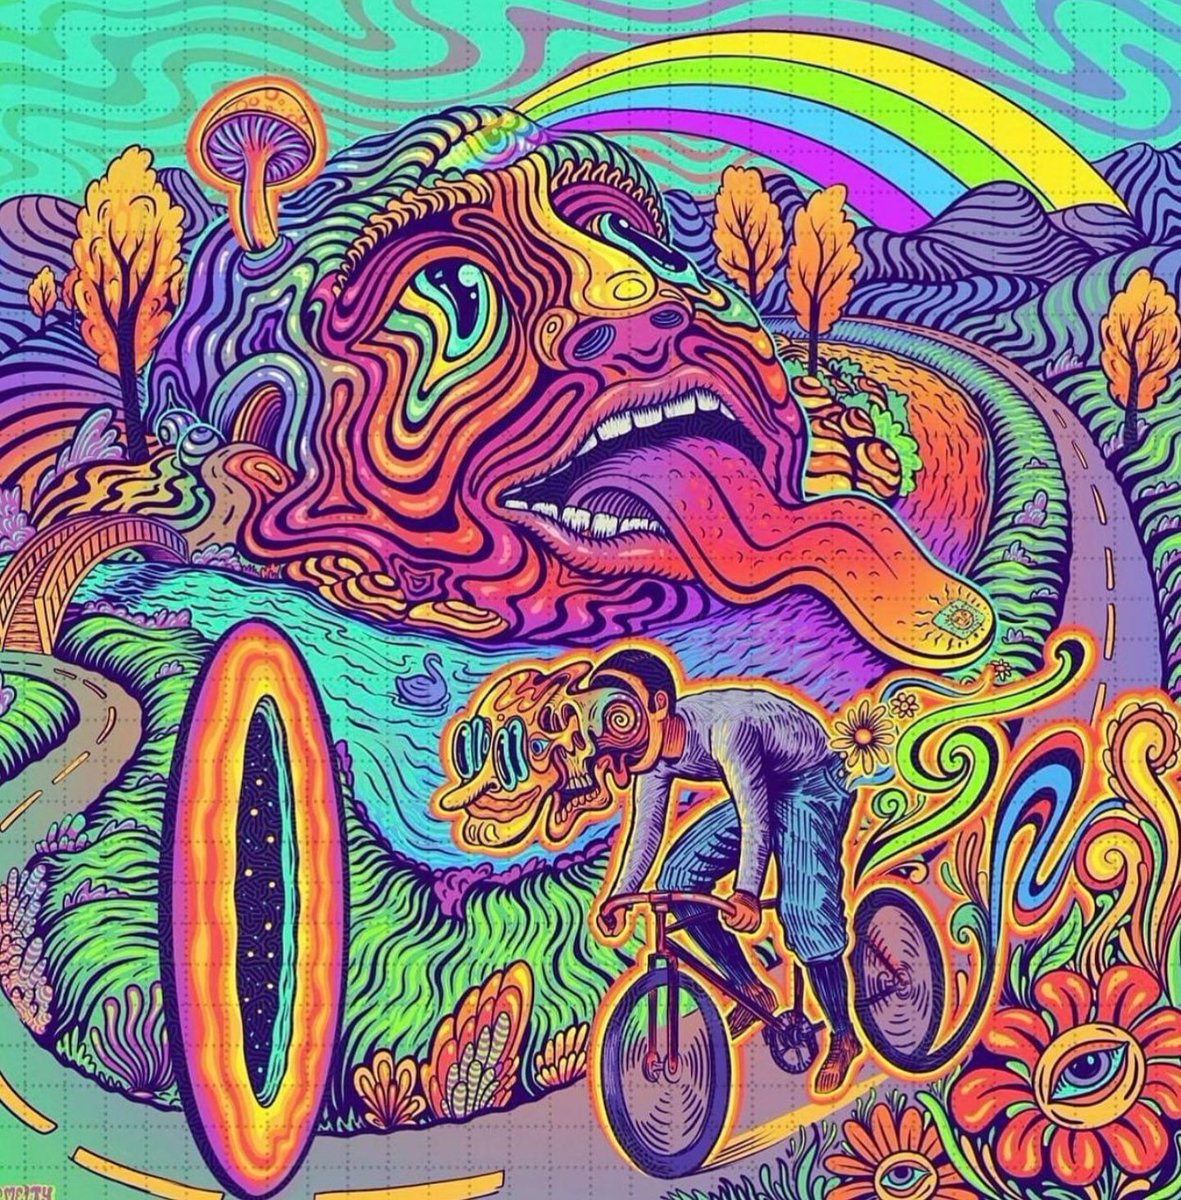 Bicycle Day artwork by Mr. Melty 😍🤩
#psychedelic #trippy #BicycleDay #art